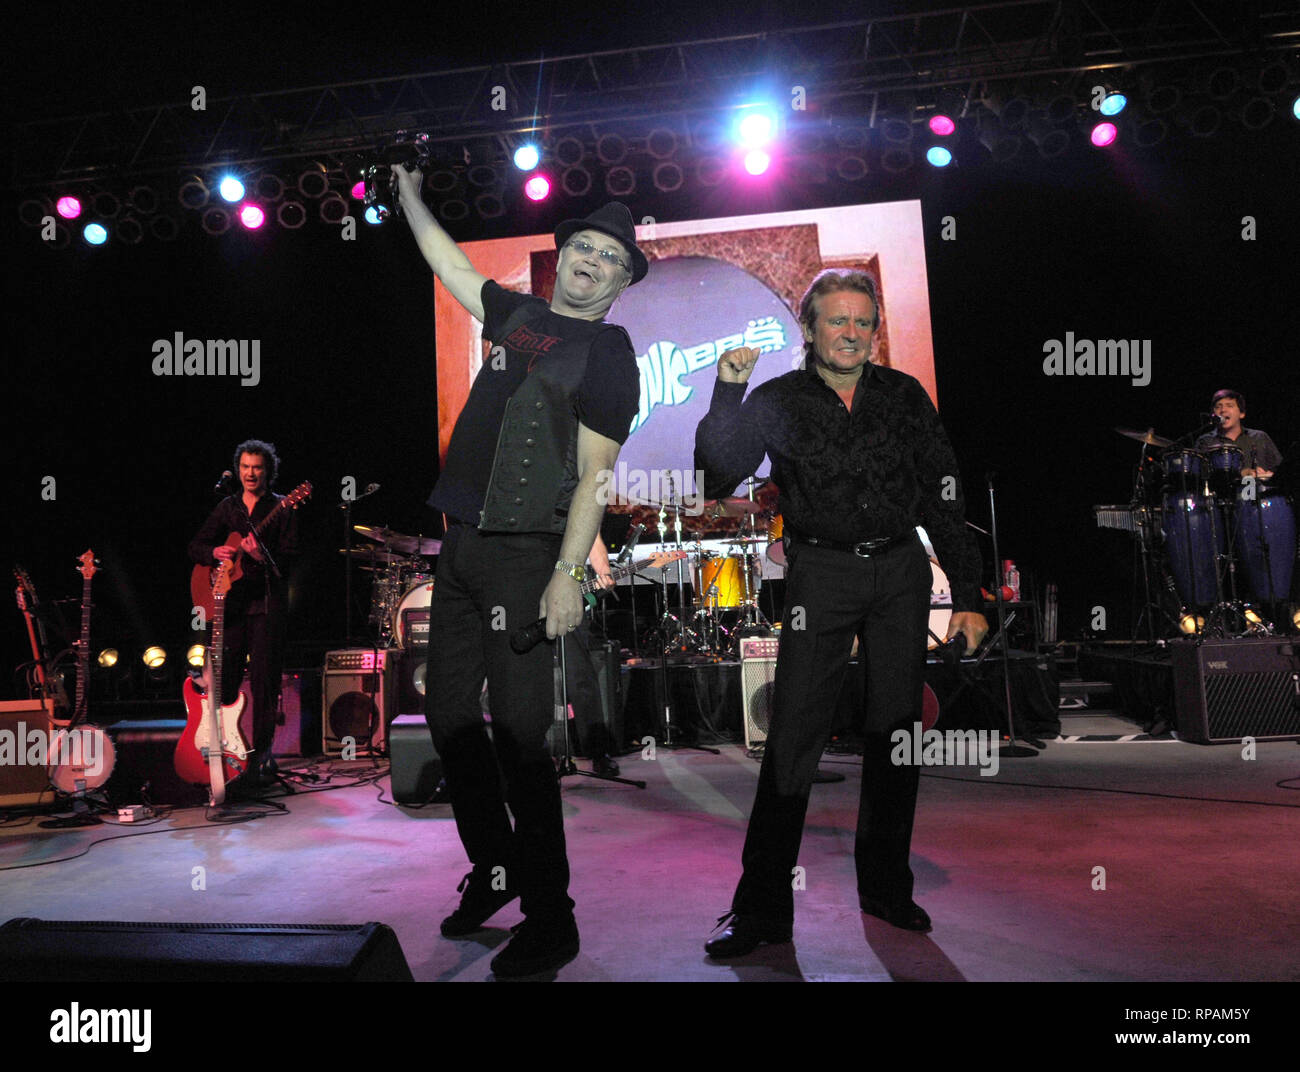 POMPANO BEACH, FL - JUNE 05:  Davy Jones, Peter Tork and Micky Dolenz of The Monkees perform their U.S. Tour at t the Pompano Beach Ampitheatrer.  on June 5, 2011 in Pompano Beach, Florida.  People:   The Monkees Stock Photo